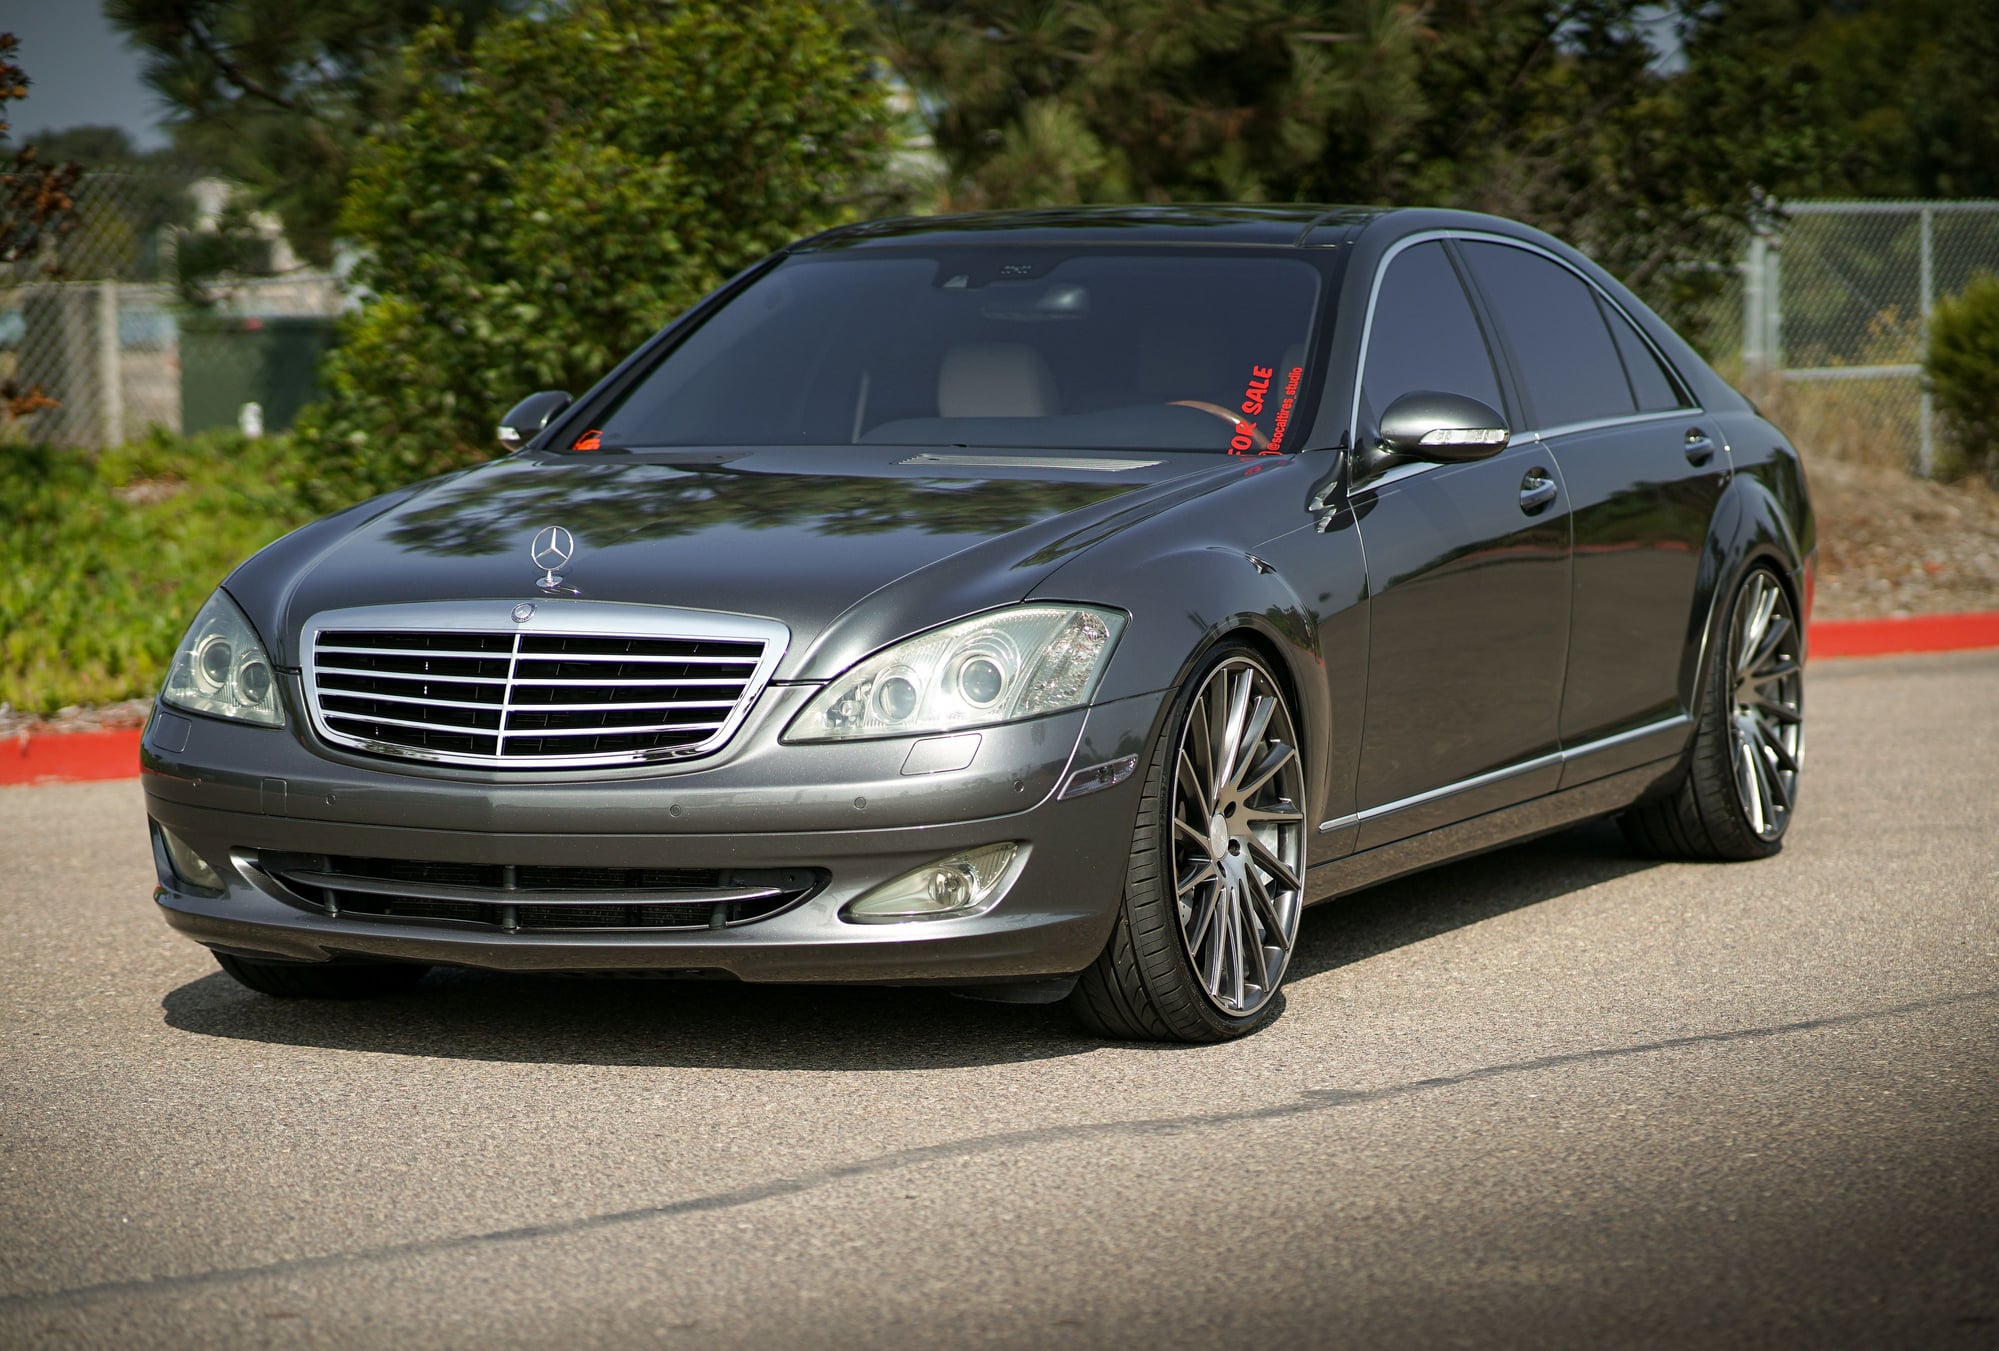 2007 Mercedes-Benz S550 - Mercedes-Benz s550 / Designo Package / Fully Maintained / 22" Rims / Carbon Fiber - Used - VIN WDDNG71X07A047206 - 122,250 Miles - 8 cyl - 2WD - Automatic - Sedan - Gray - San Diego, CA 91945, United States